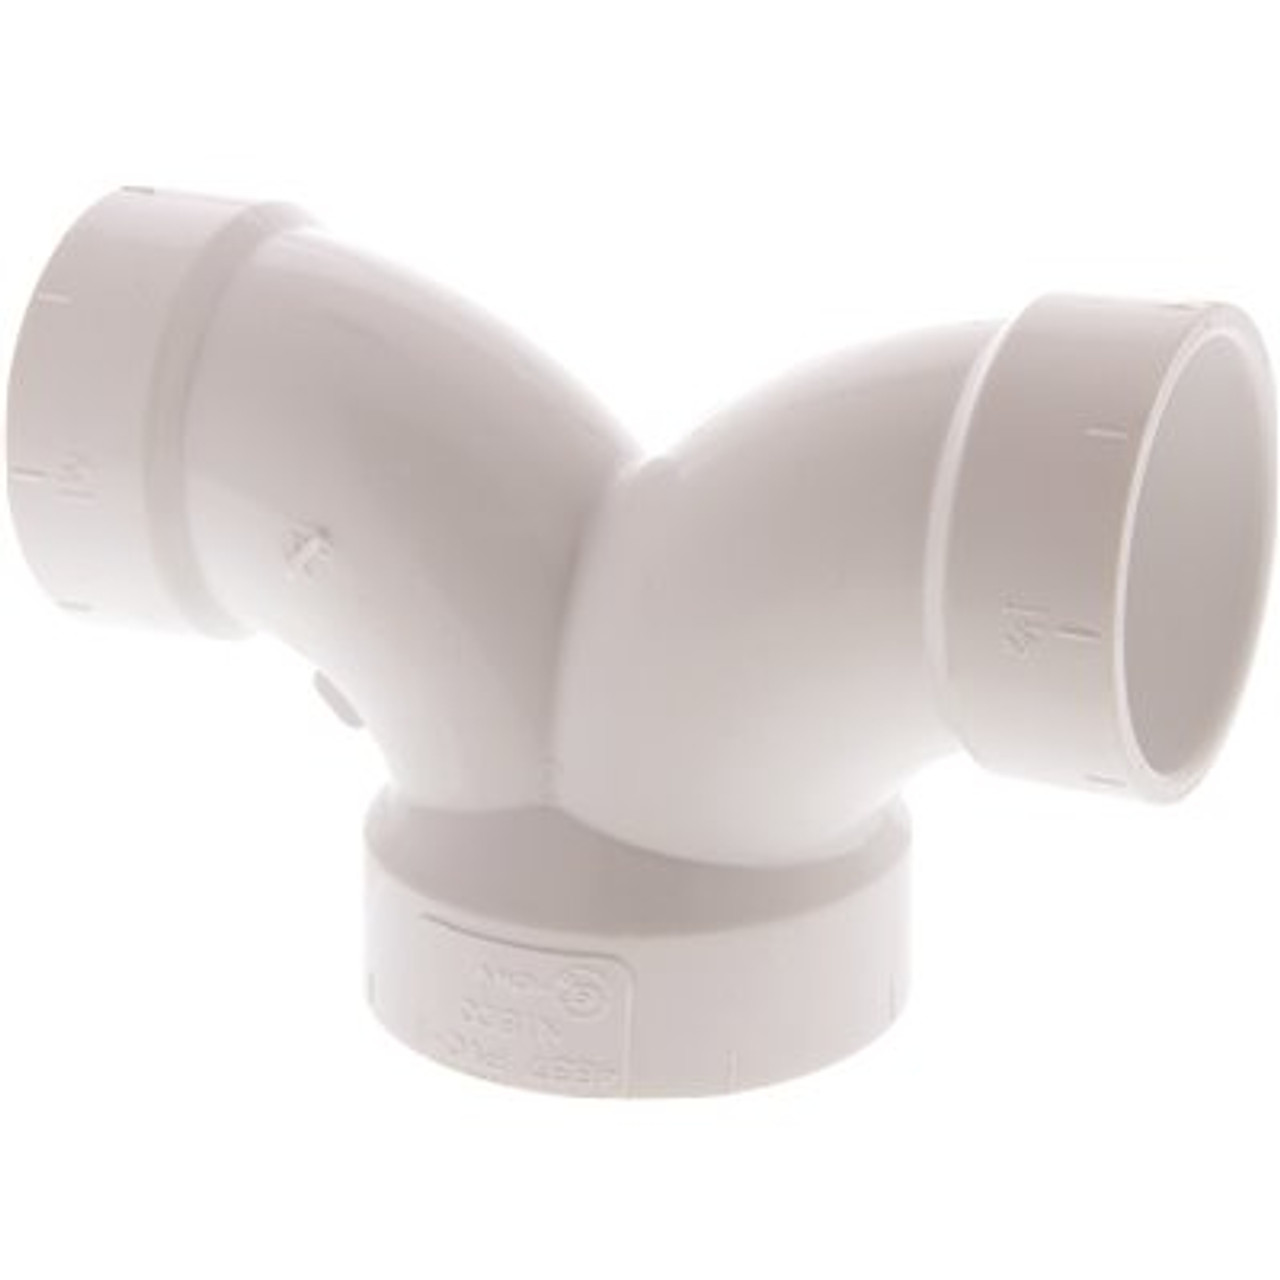 NIBCO 2 in. x 1-1/2 in. x 1-1/2 in. PVC DWV 90-Degree All Hub Double Elbow Fitting